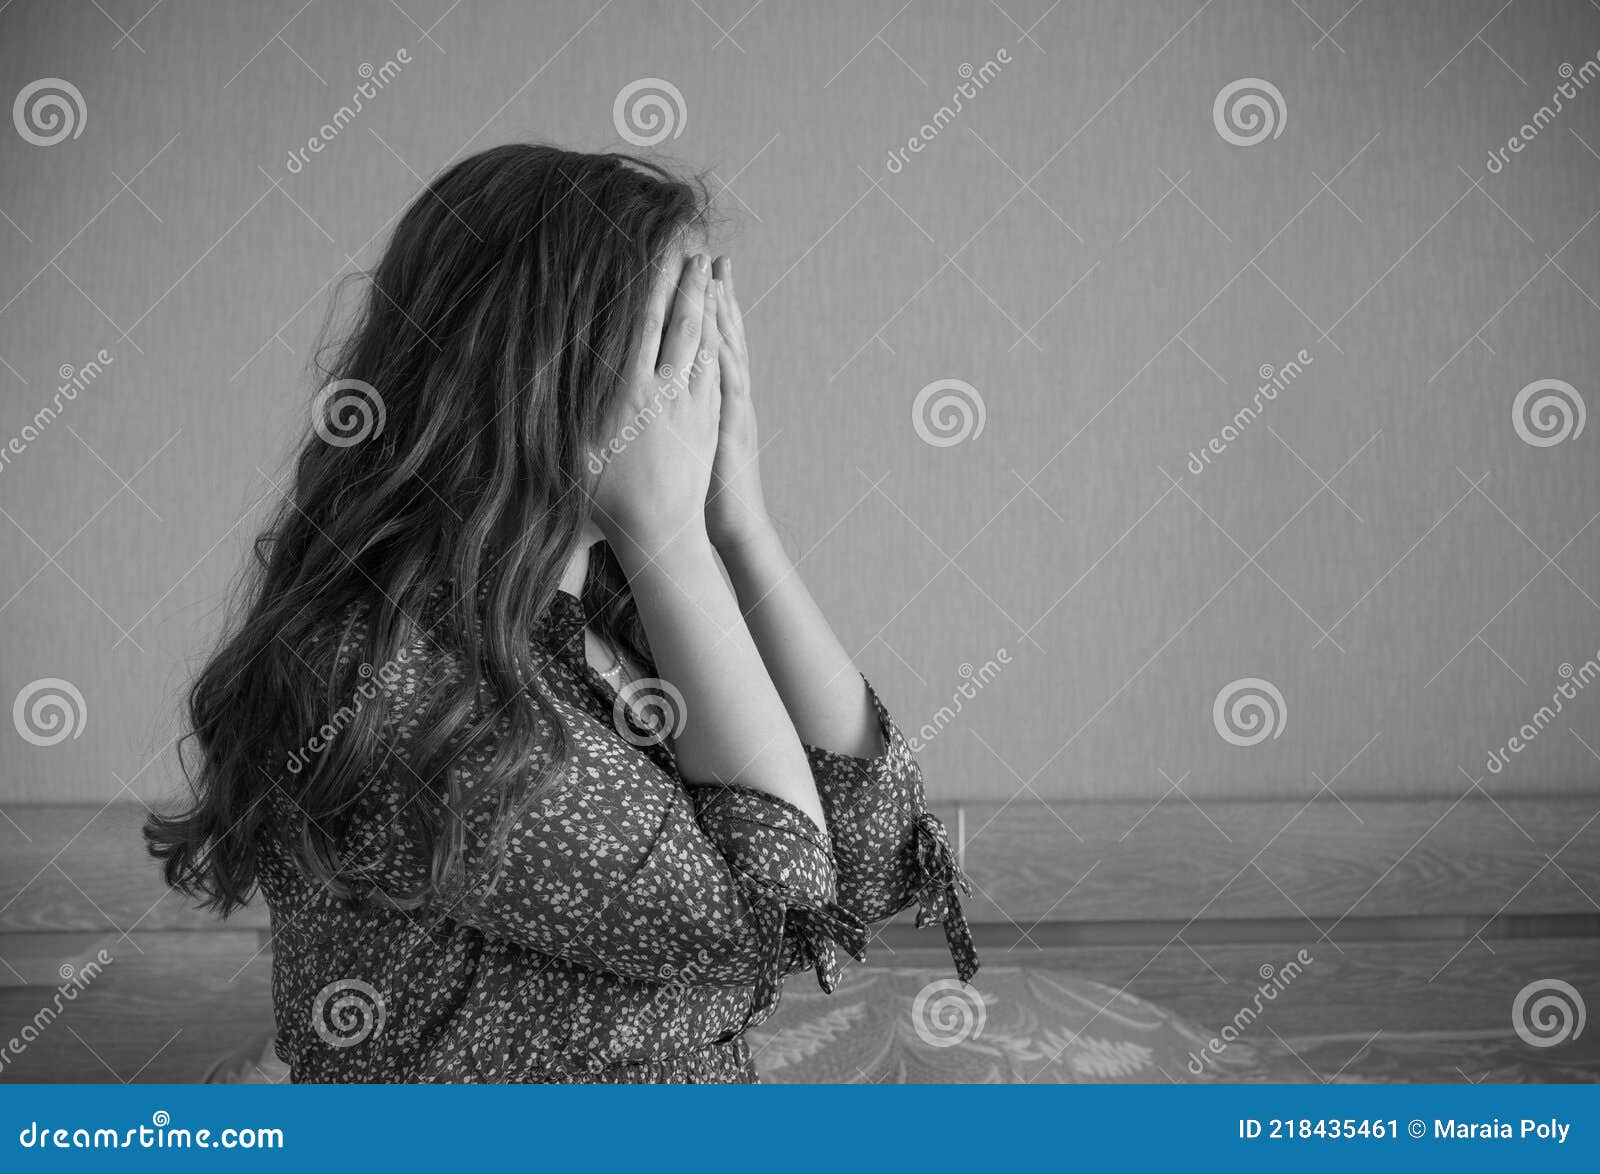 Woman Stress Alone, Sad Sitting on Bed in Depression. Concept ...